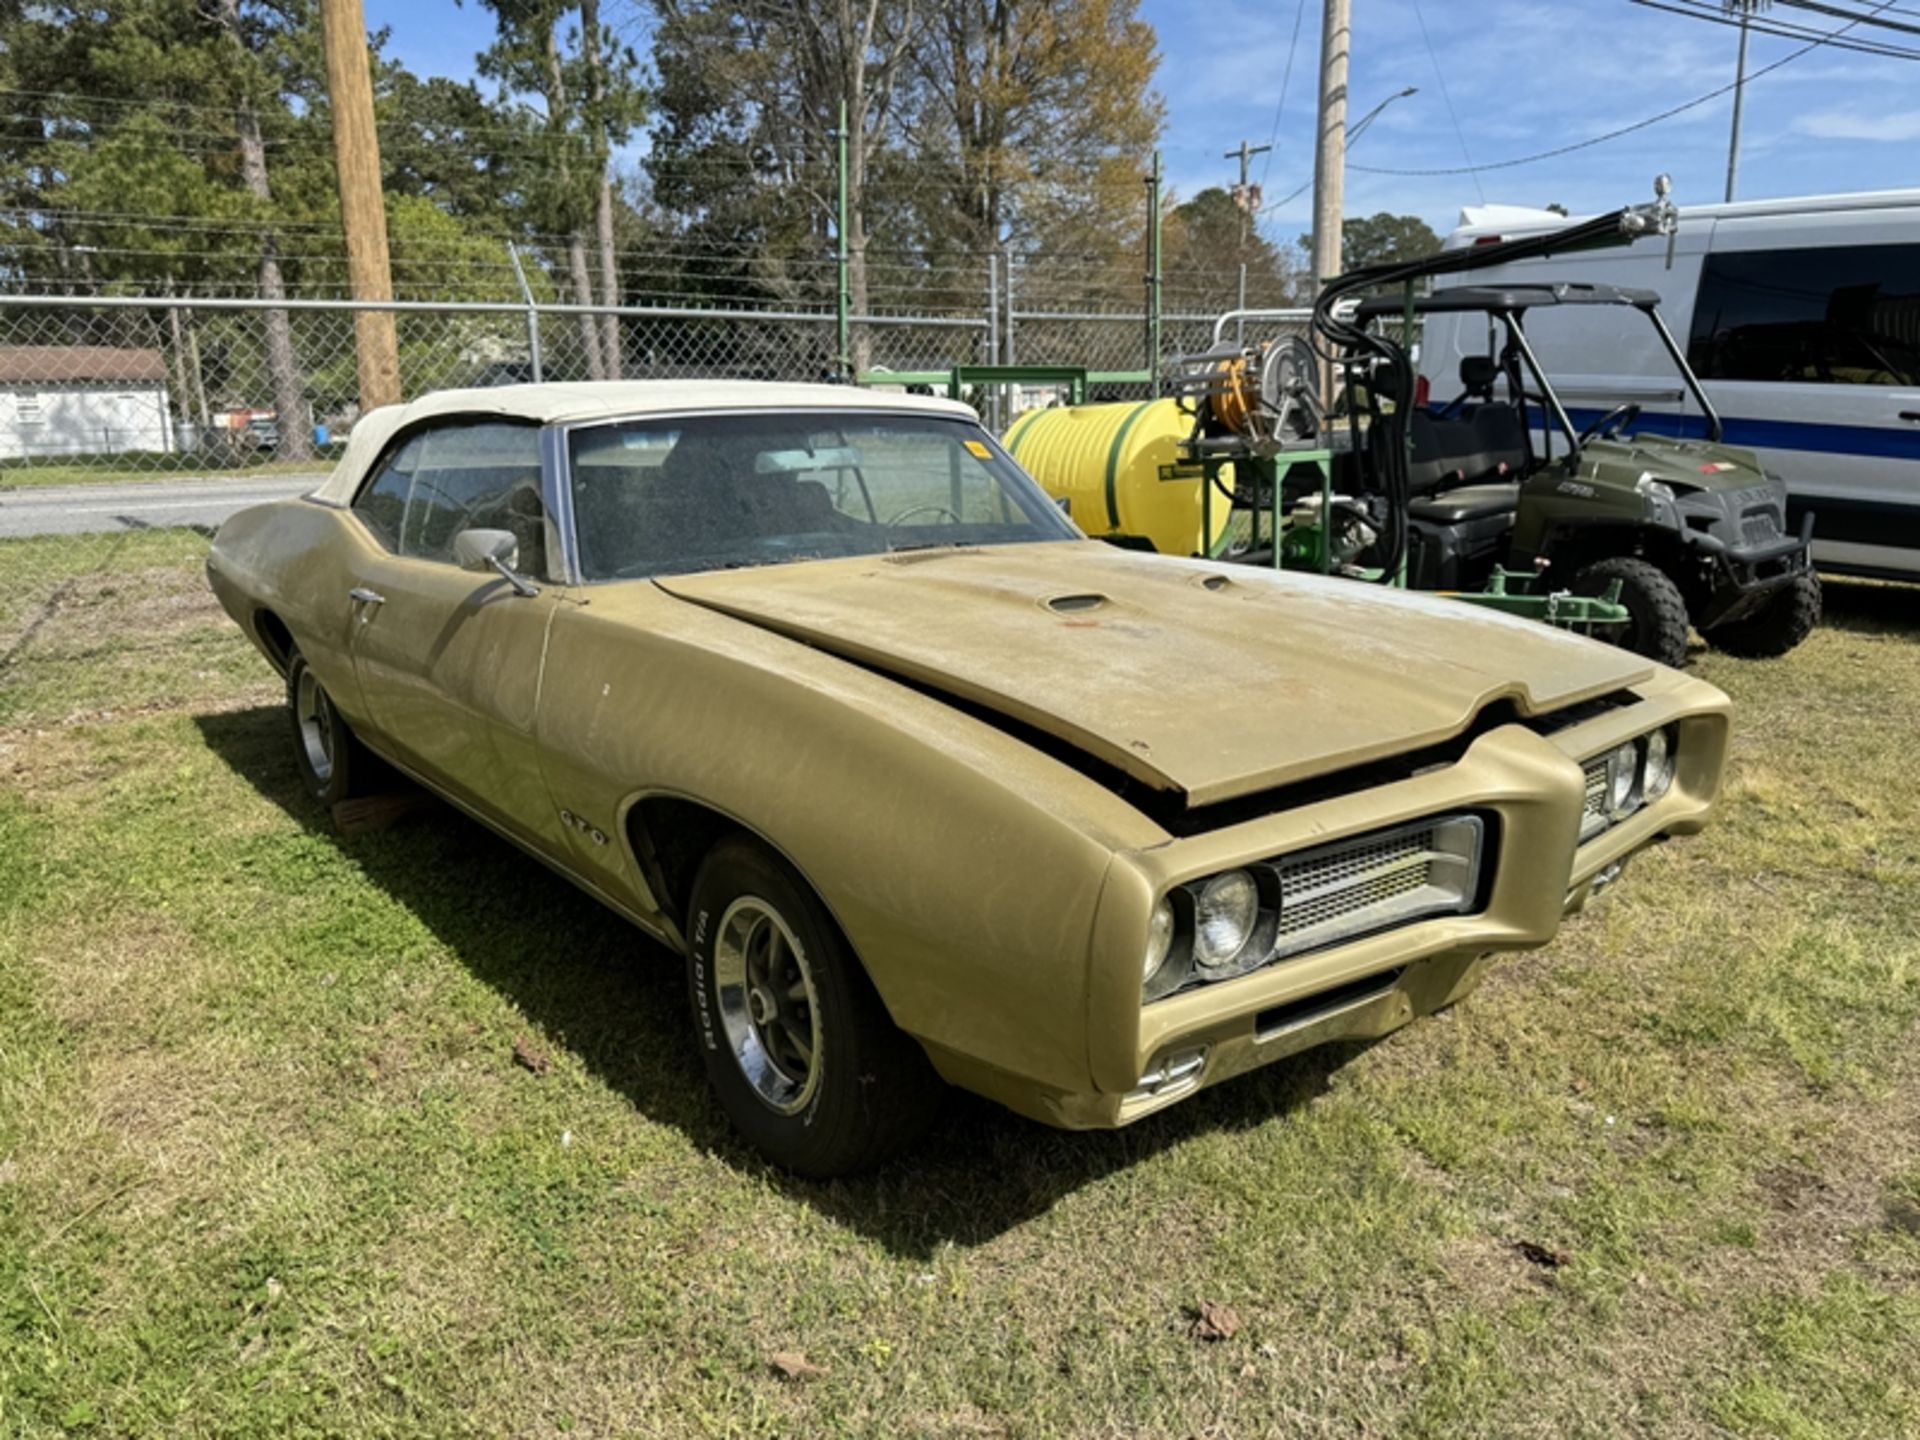 1969 PONTIAC GTO convertible - engine rebuilt and modified, but not hooked up completely - mileage - Image 2 of 13